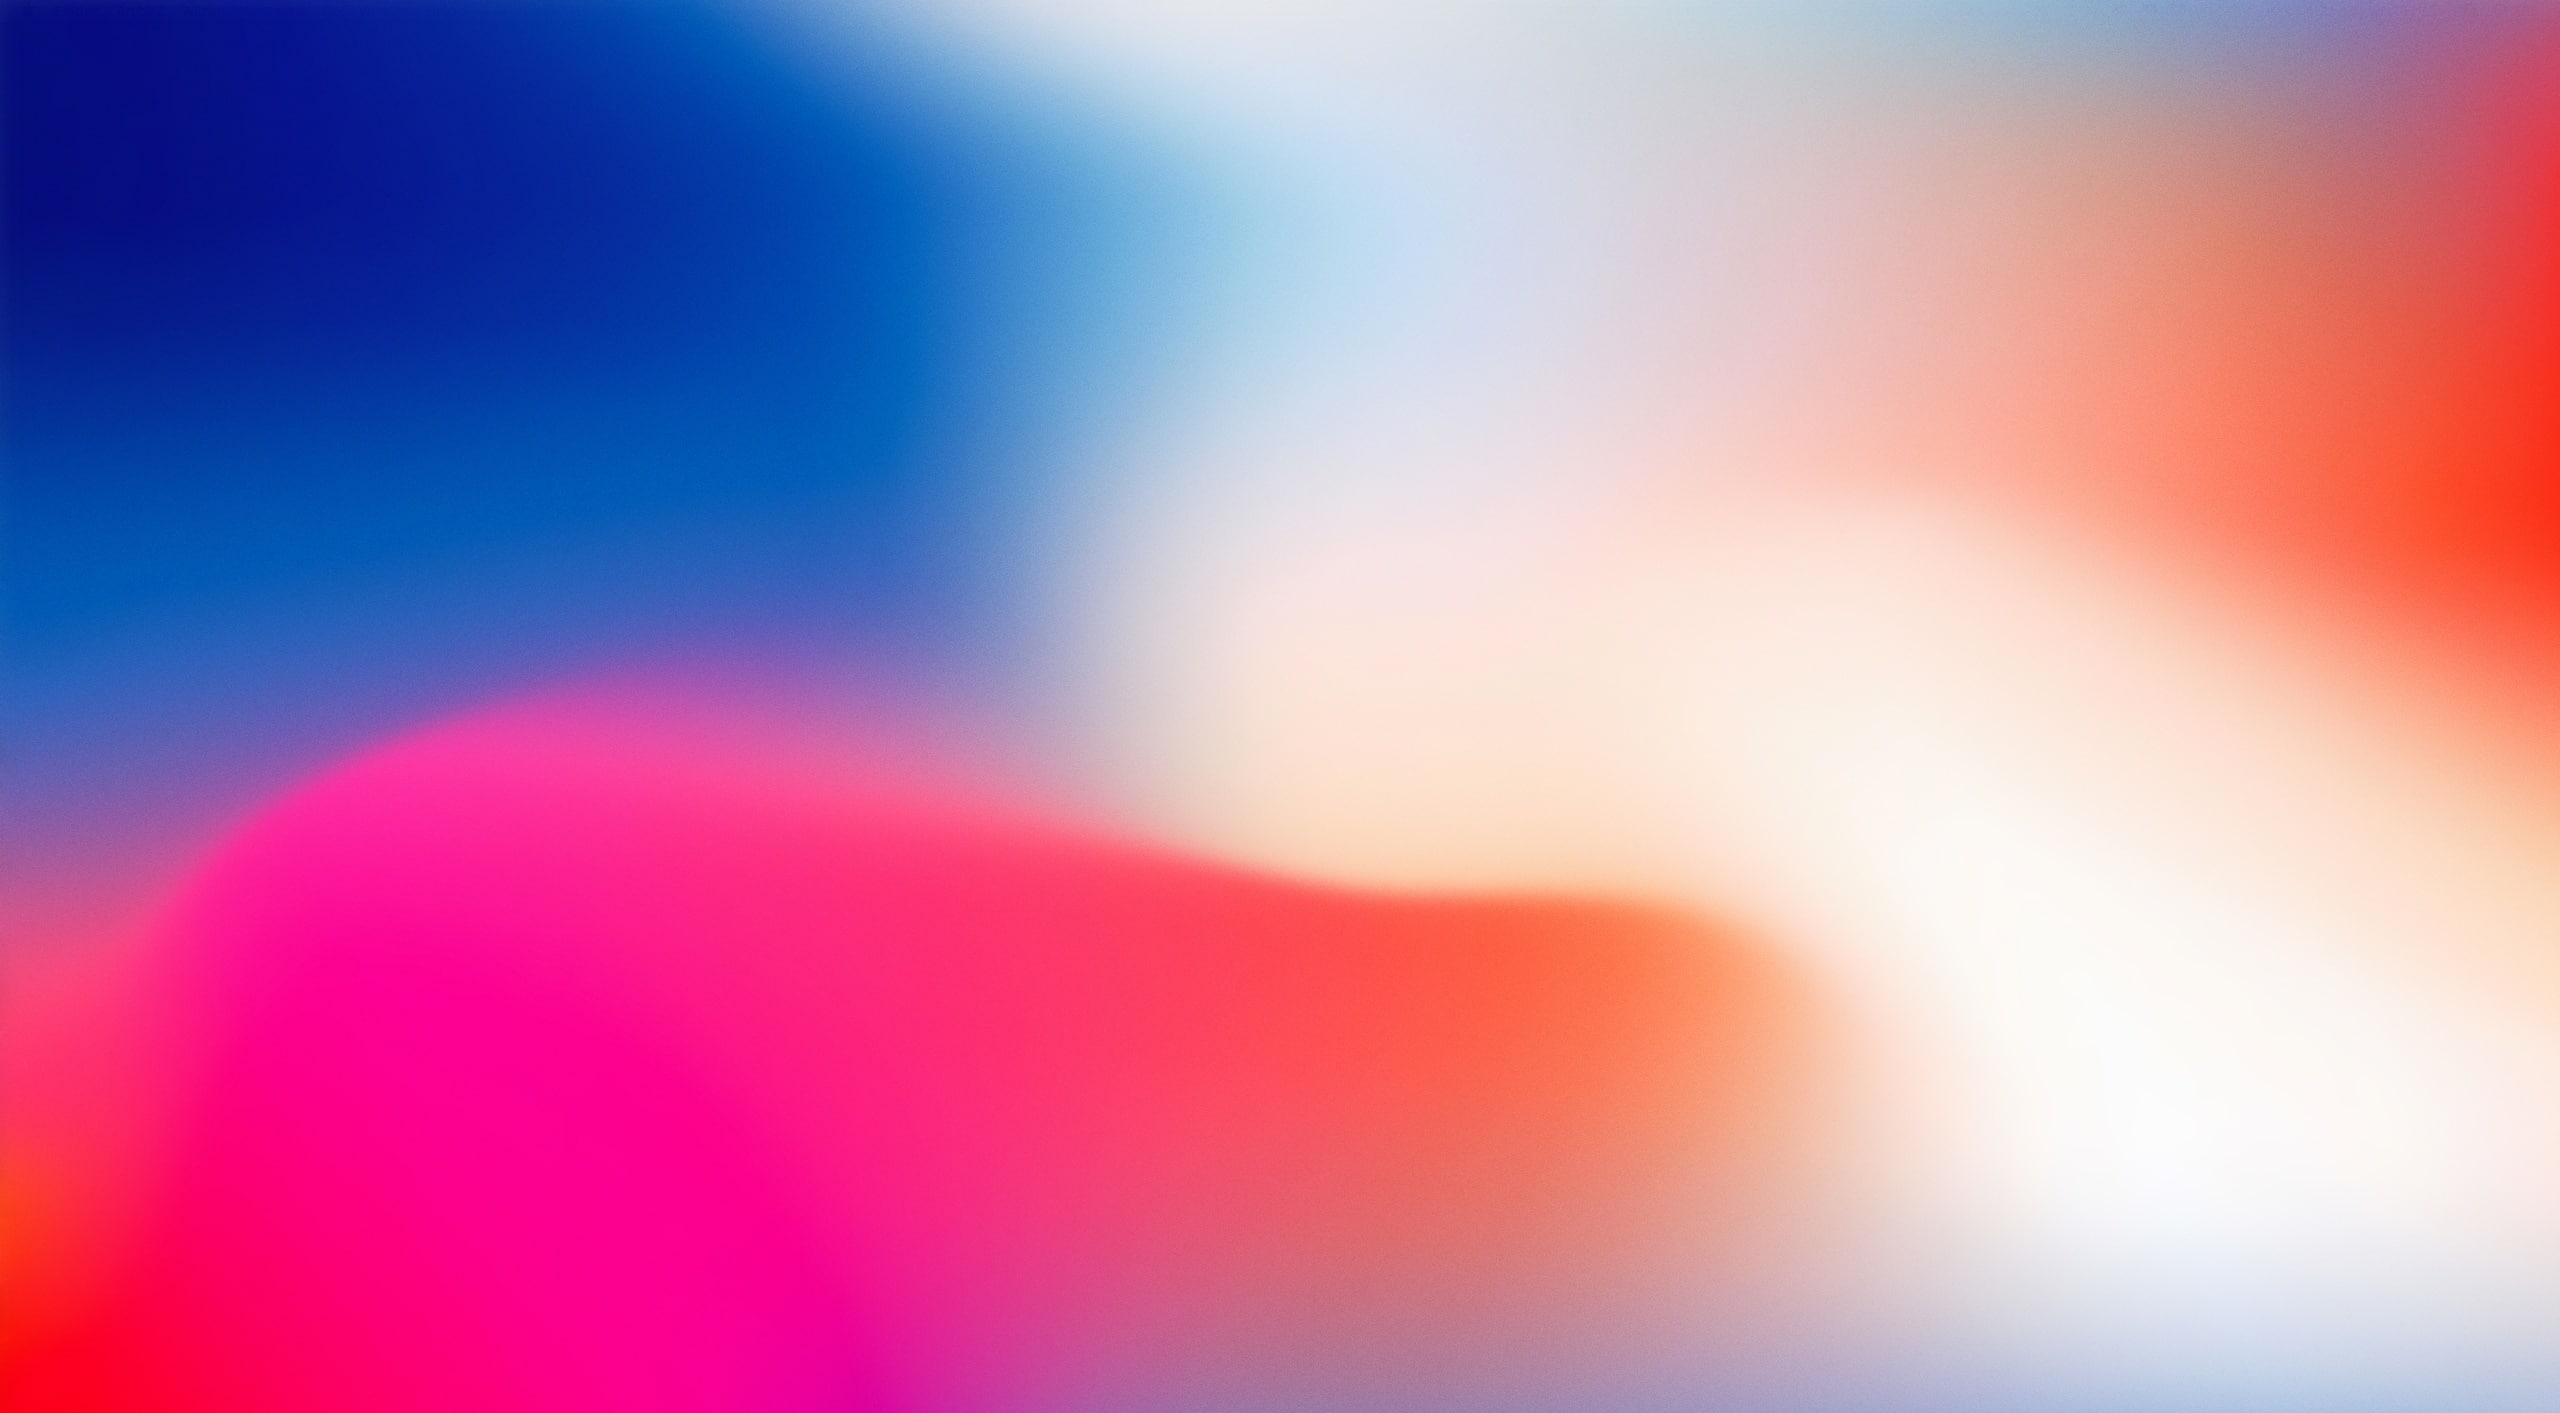 iPhone X Wallpaper for Mac OS, Computers, Colorful, Abstract